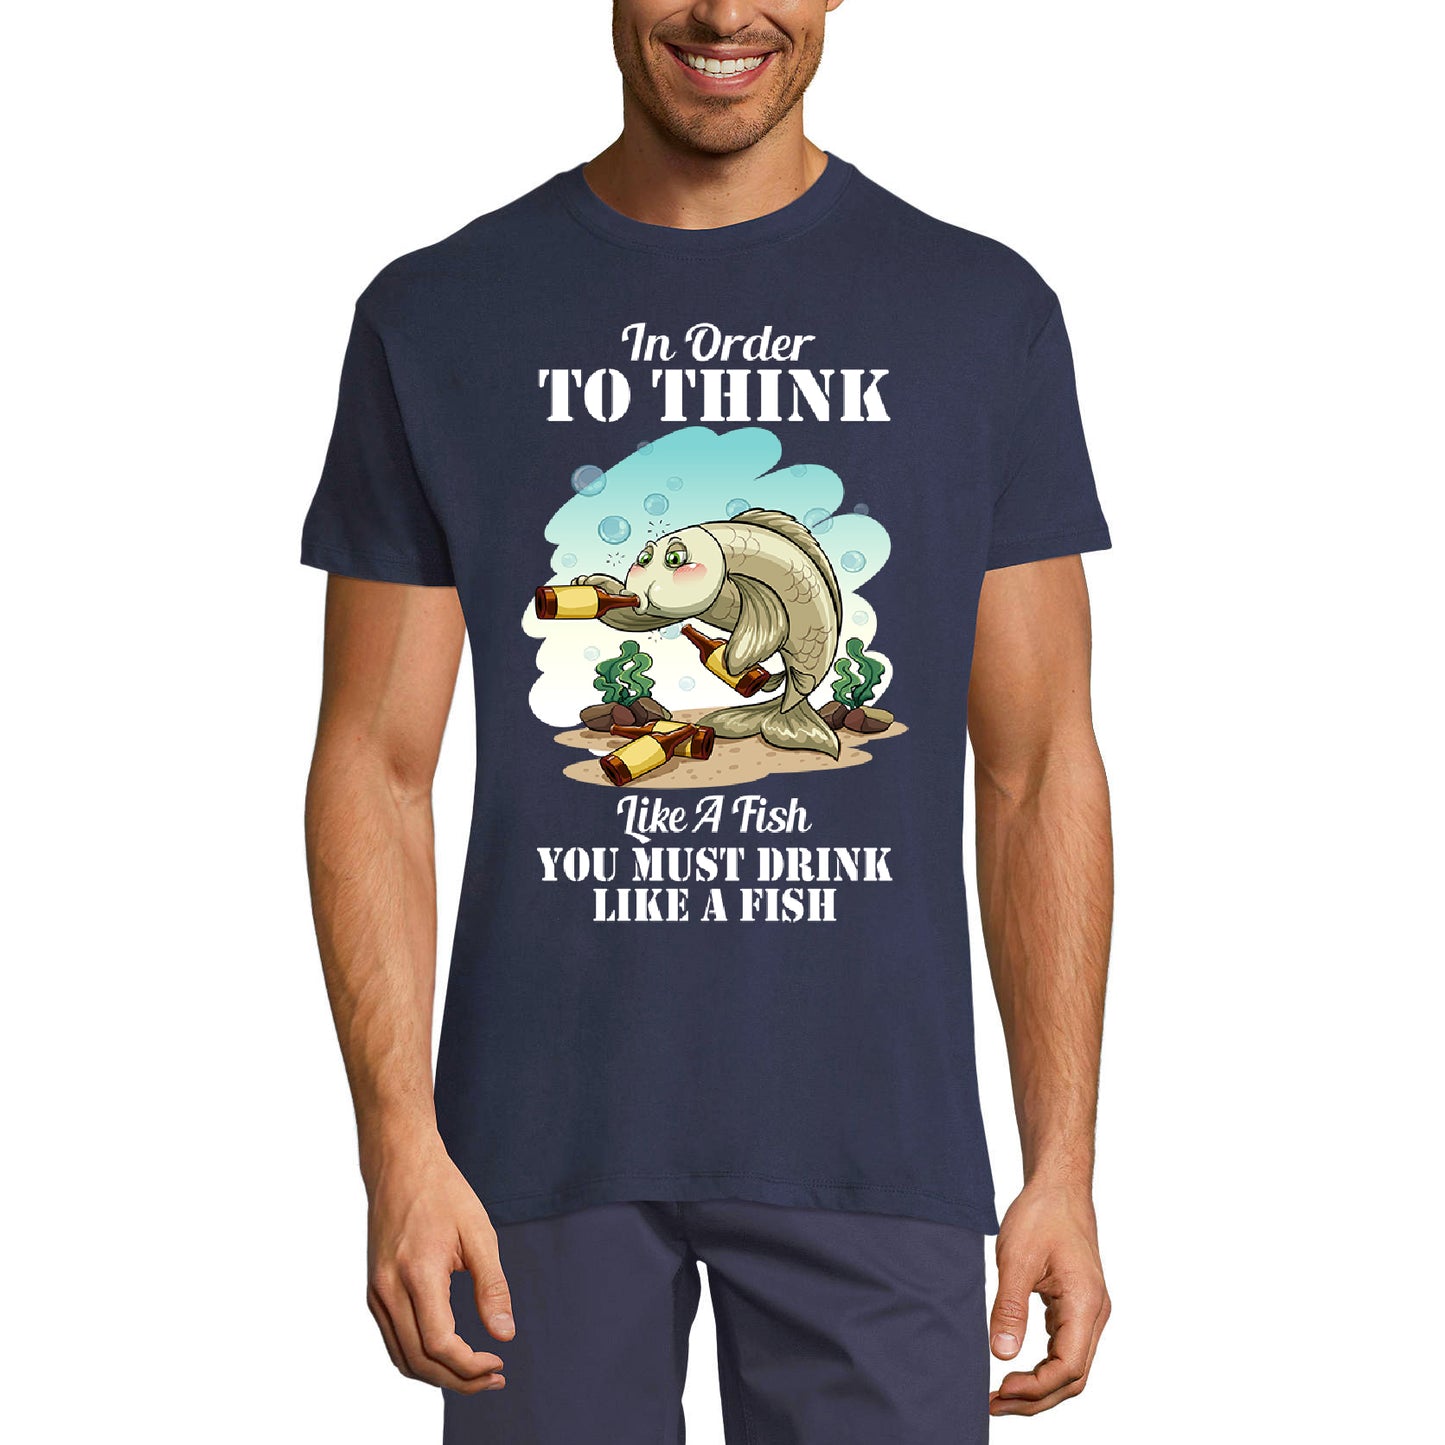 ULTRABASIC Men's Humor T-Shirt In Order to Think Like a Fish - You Must Drink Like a Fish - Funny Saying Beer Lover Tee Shirt